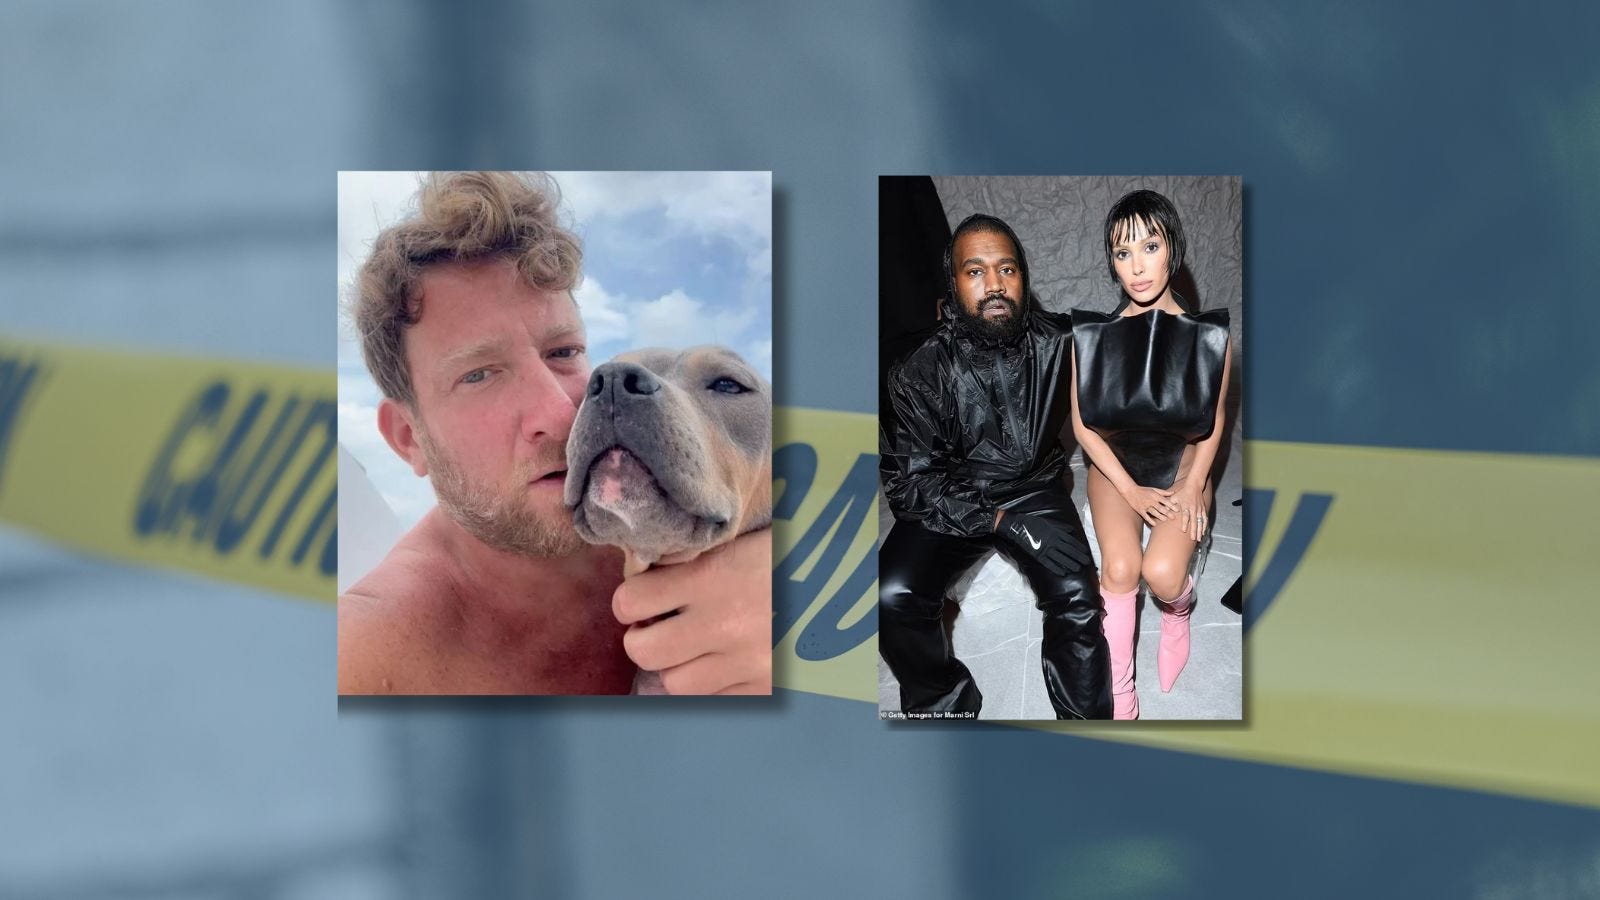 side by side images of dave portnoy with his dog miss peaches and kanye west with his wife bianca censori, behind them is an image of caution tape